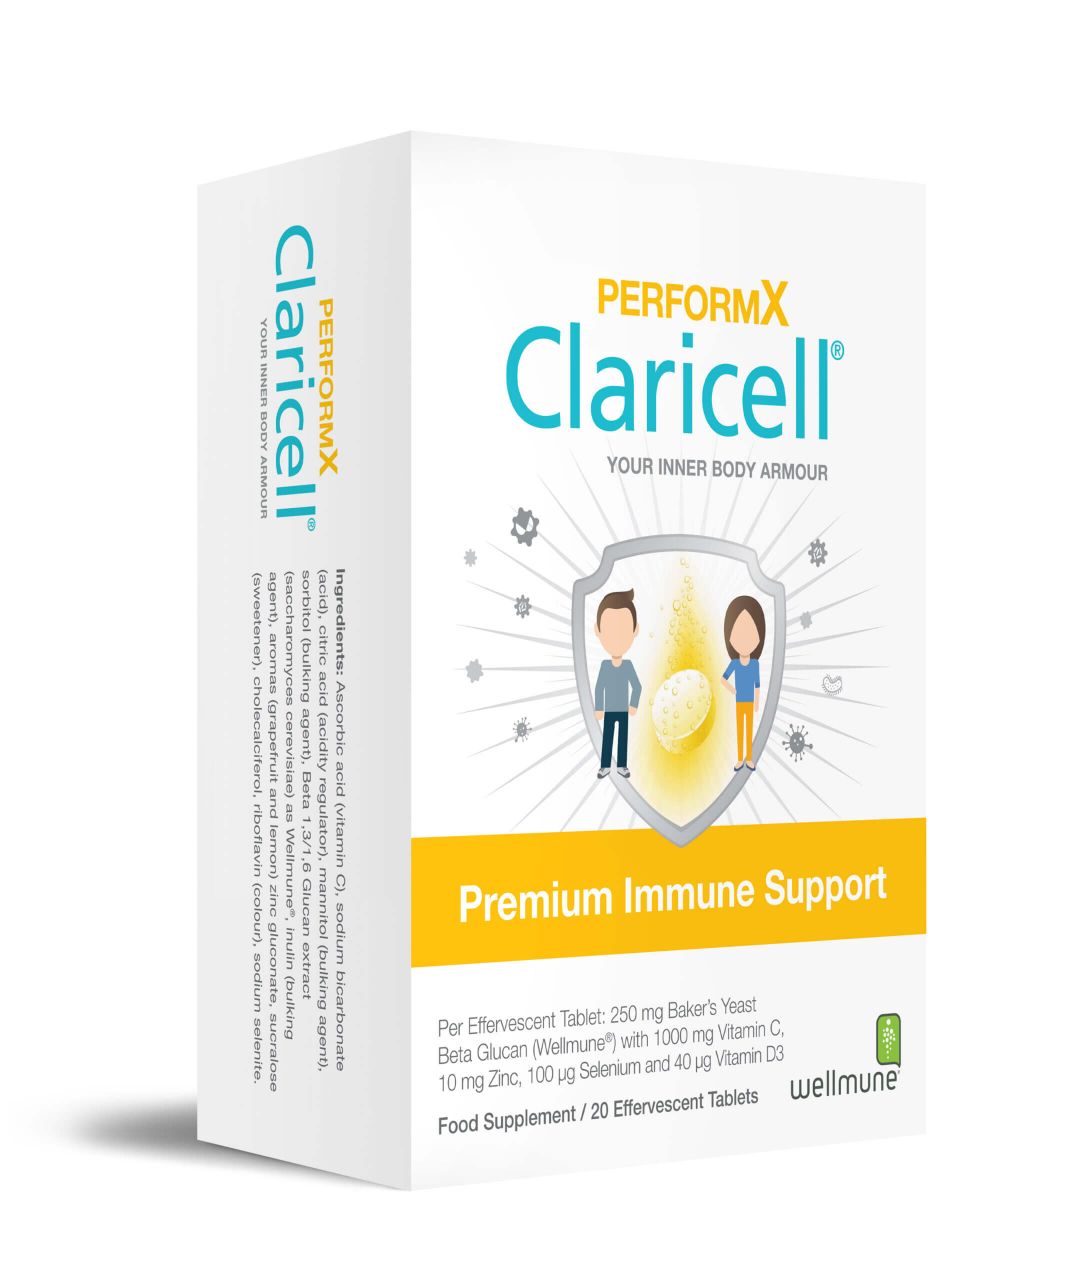 Claricell PerformX